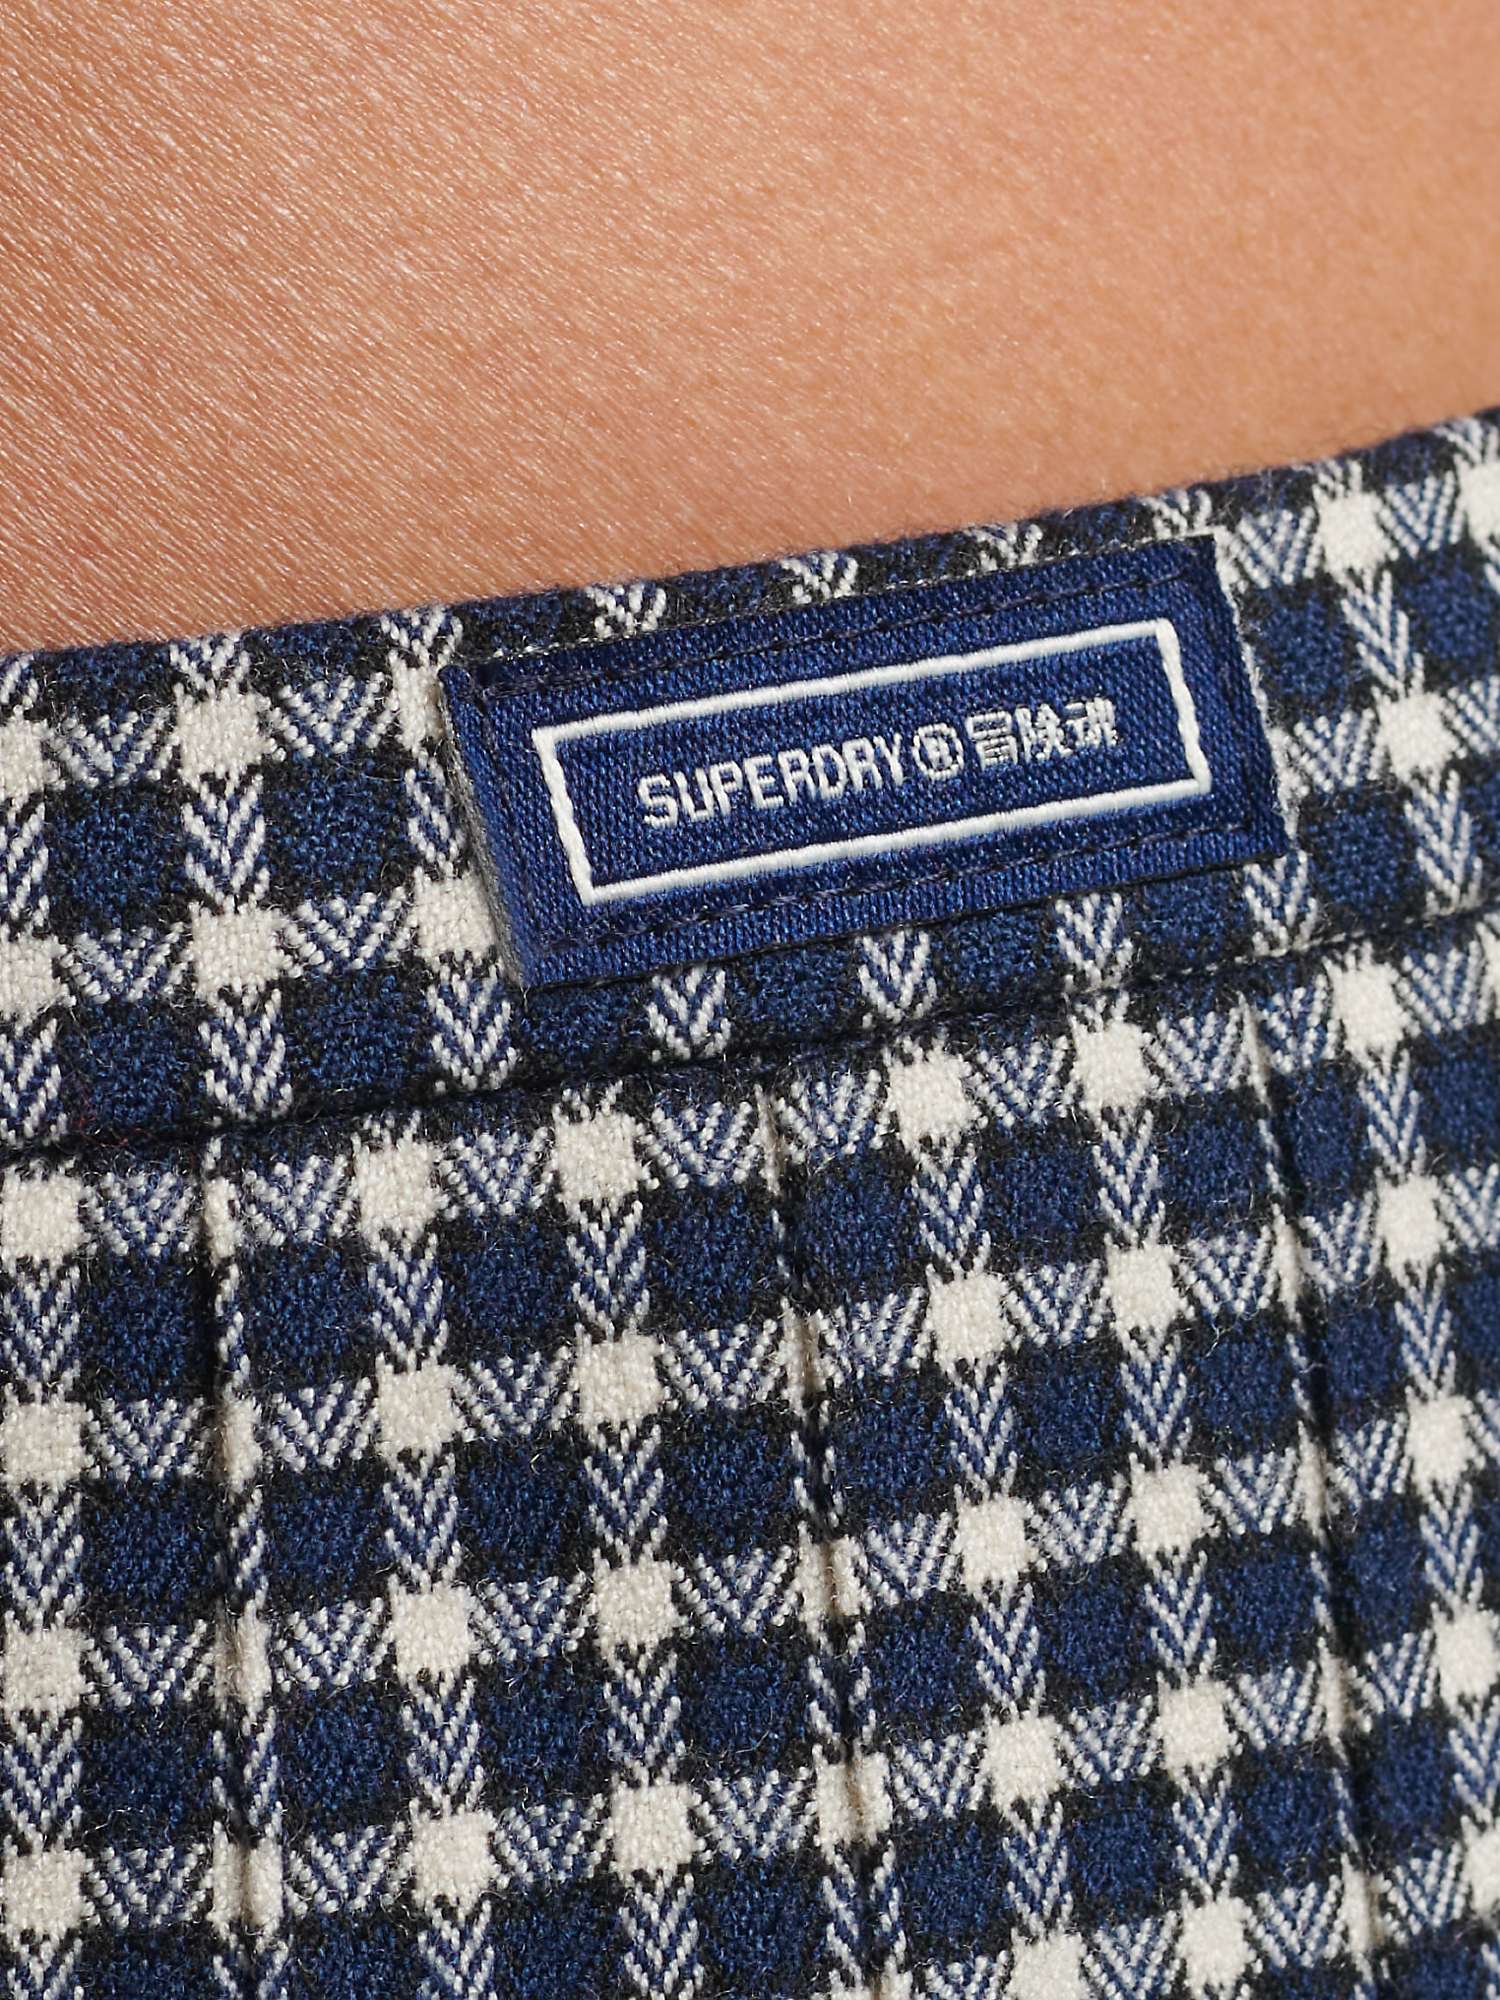 Buy Superdry Pleated Micro Check Mini Skirt, Navy/Cream Online at johnlewis.com